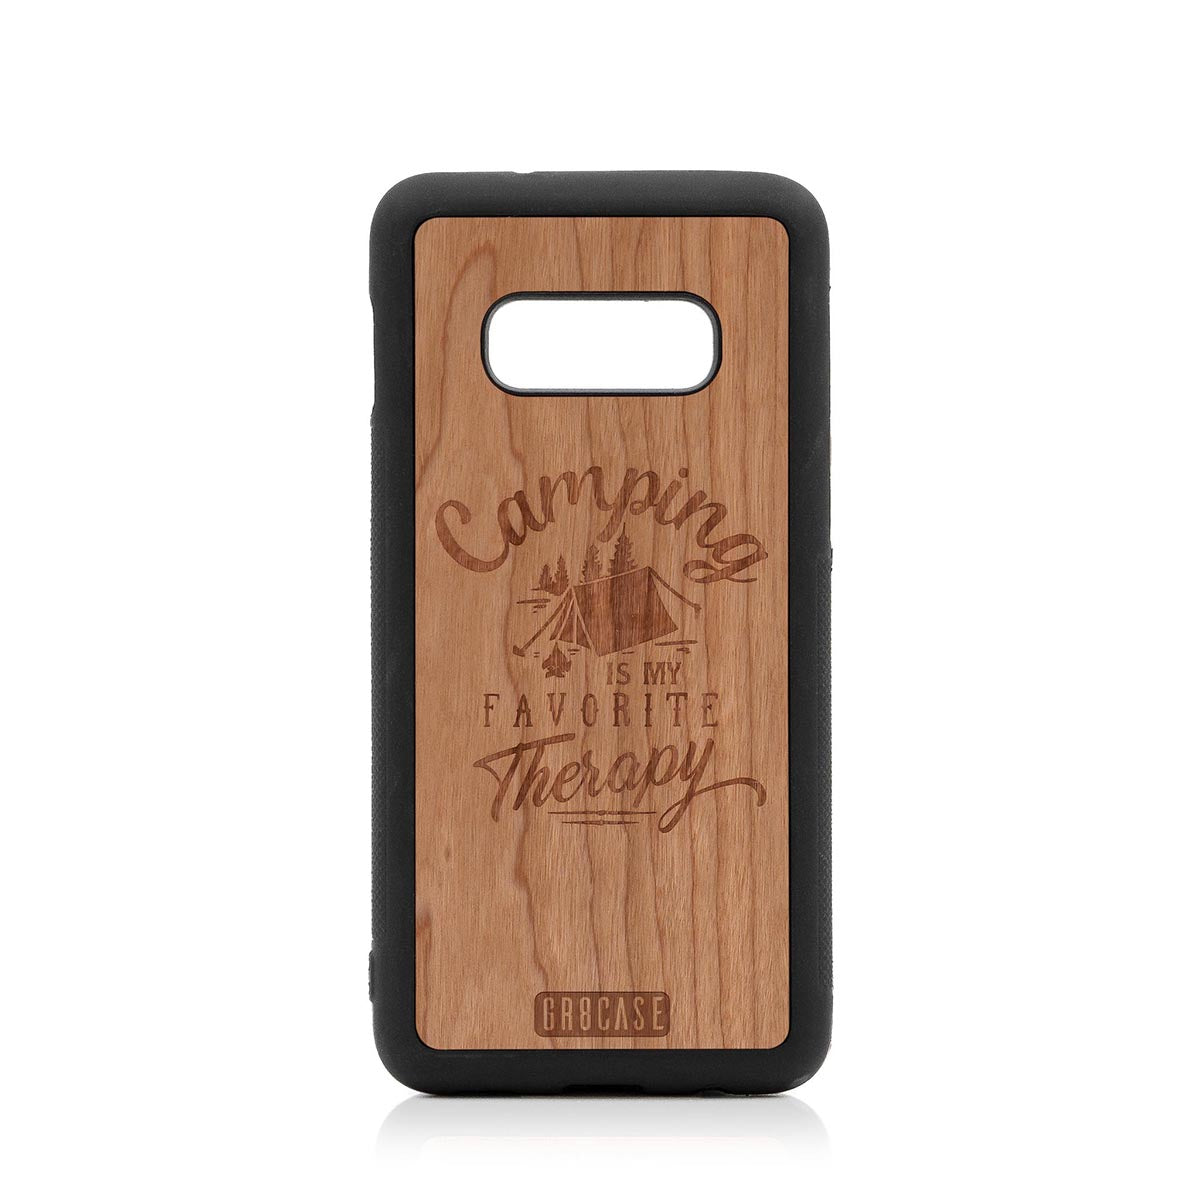 Camping Is My Favorite Therapy Design Wood Case For Samsung Galaxy S10E by GR8CASE